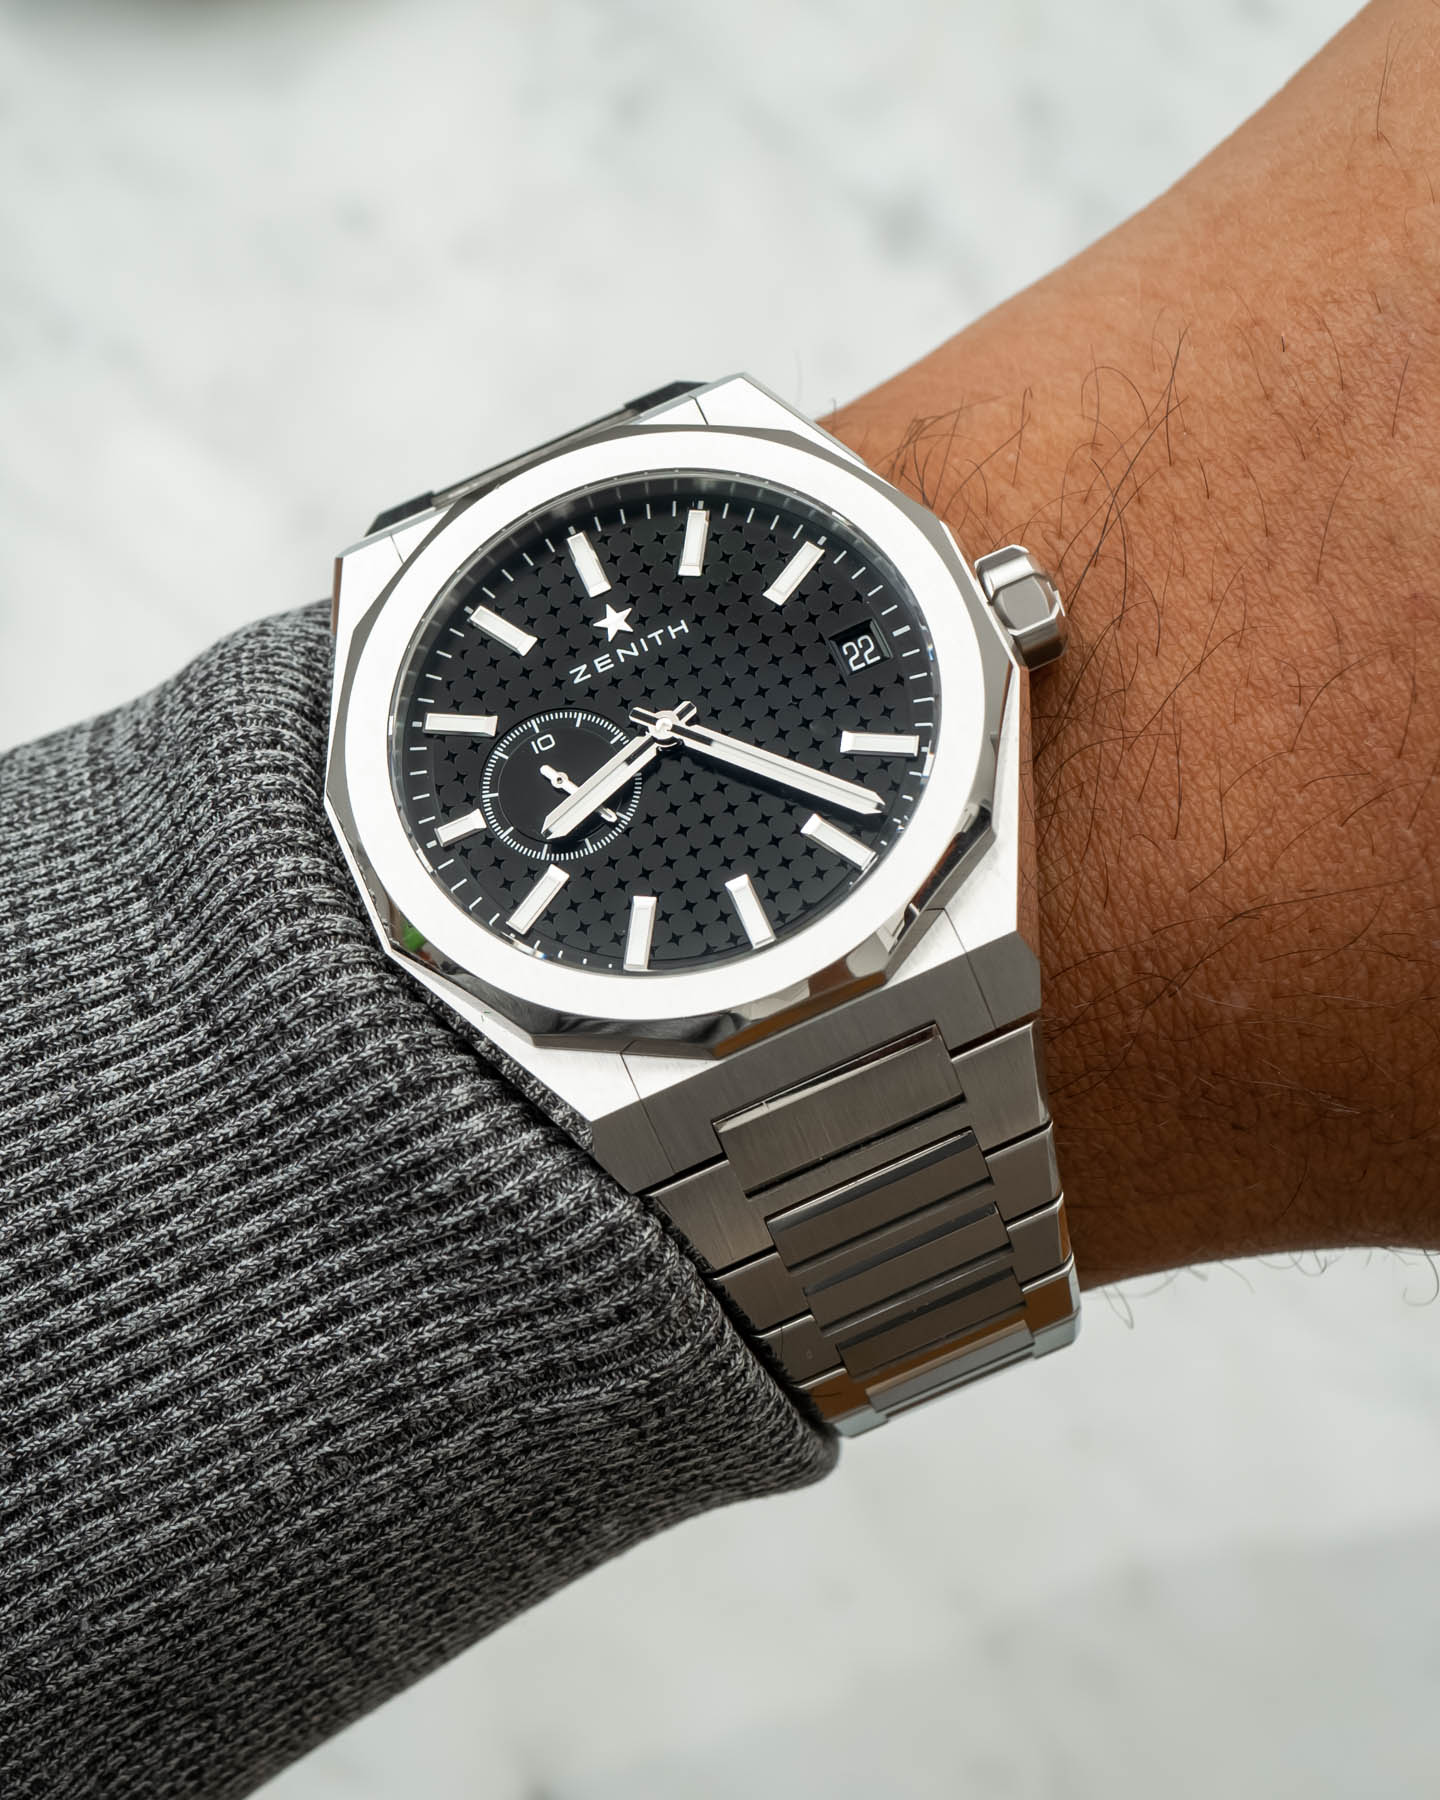 Hands-On - The new 2022 Zenith Defy Skyline Collection (Specs & Price)